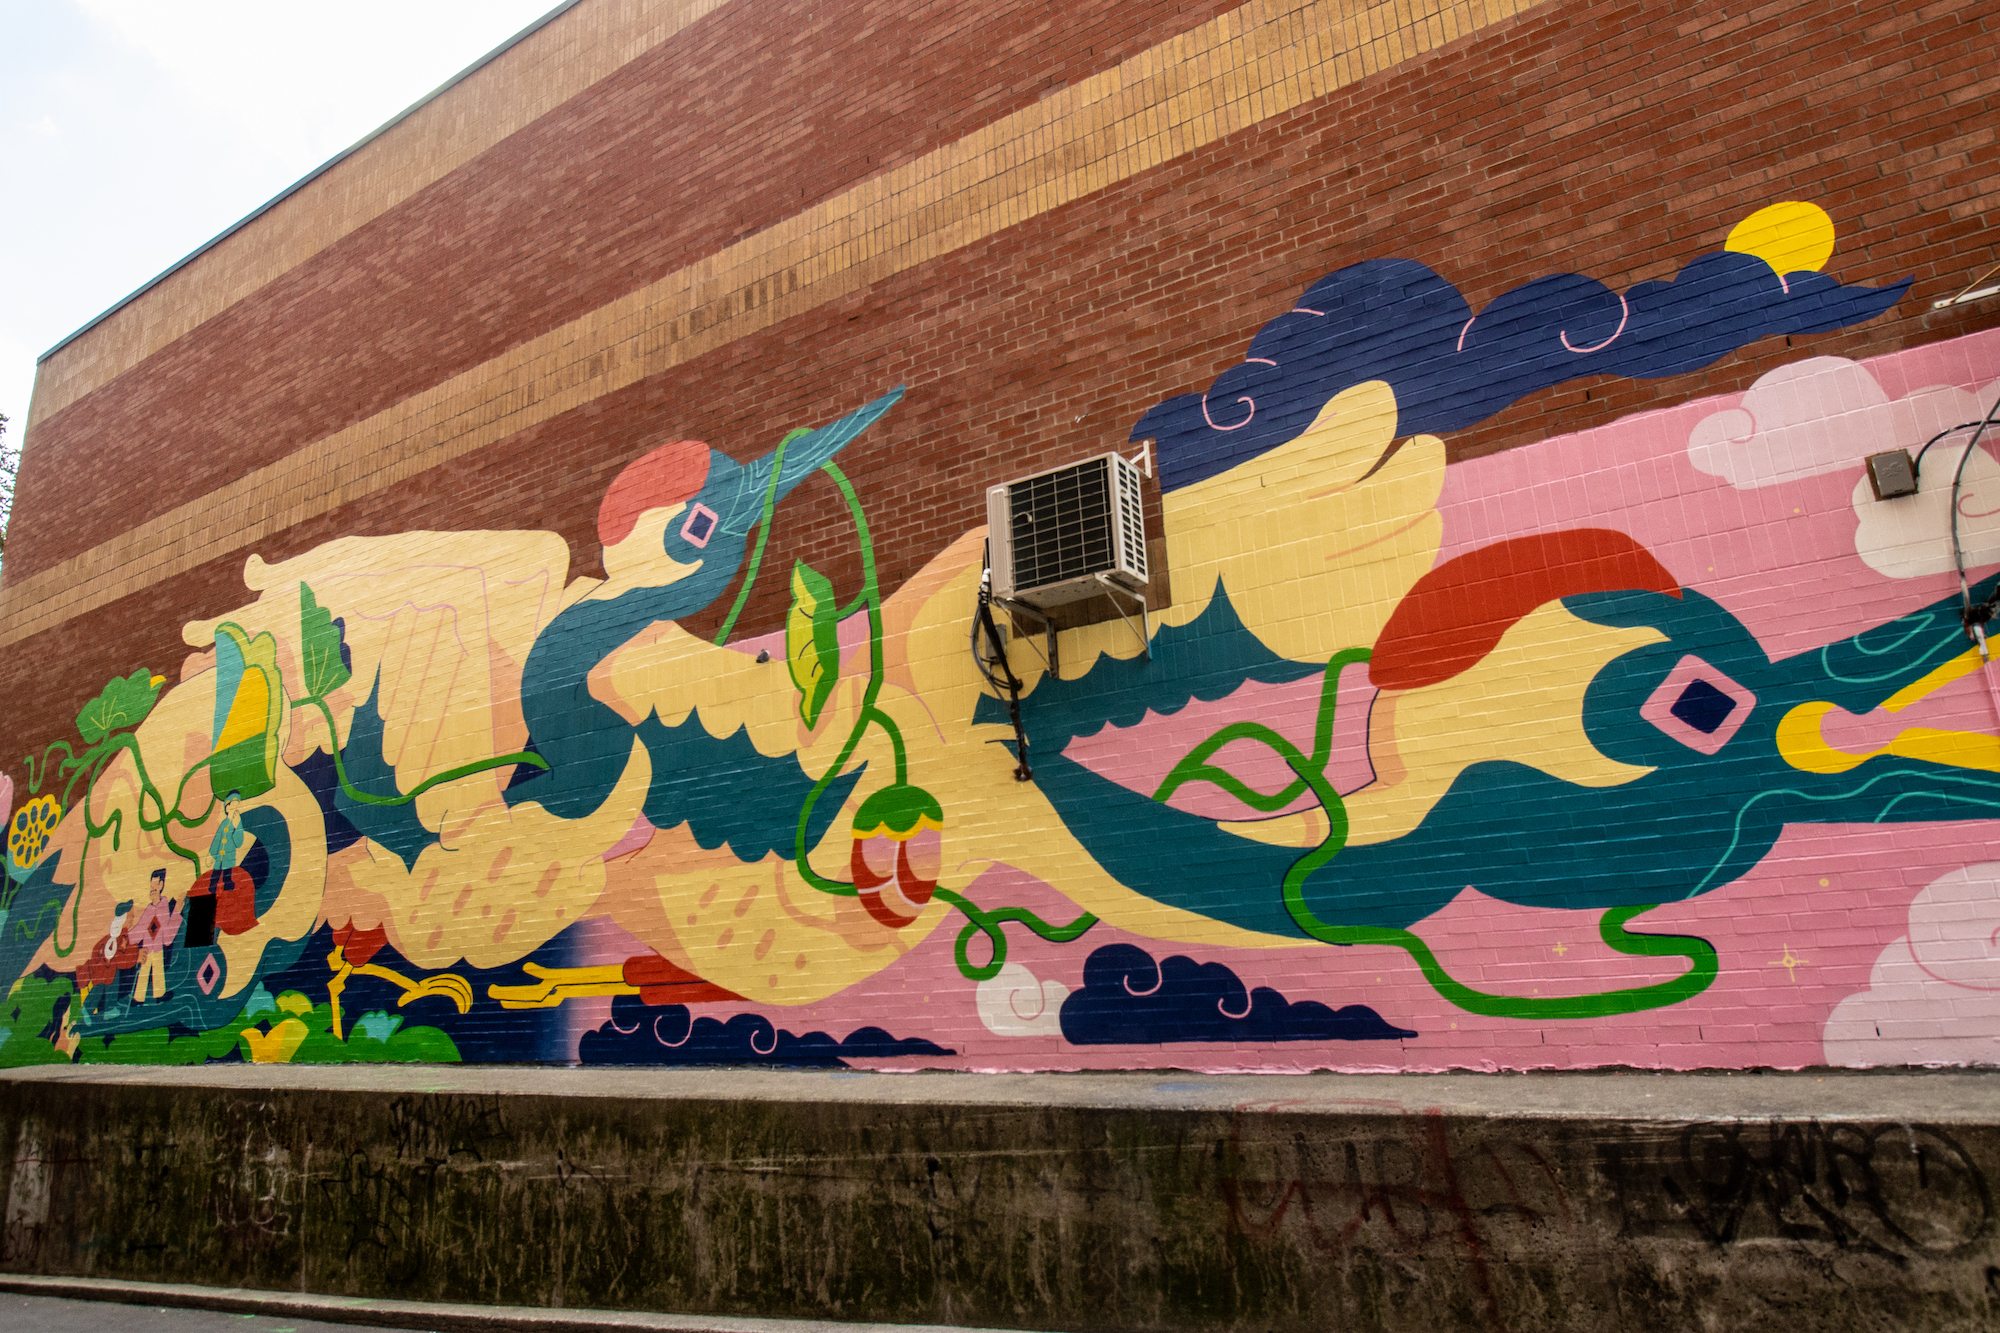 A large-scale mural on a brick wall in Toronto's Chinatown by Wenting Li. There is imagery of cranes flying and people interacting with each other.